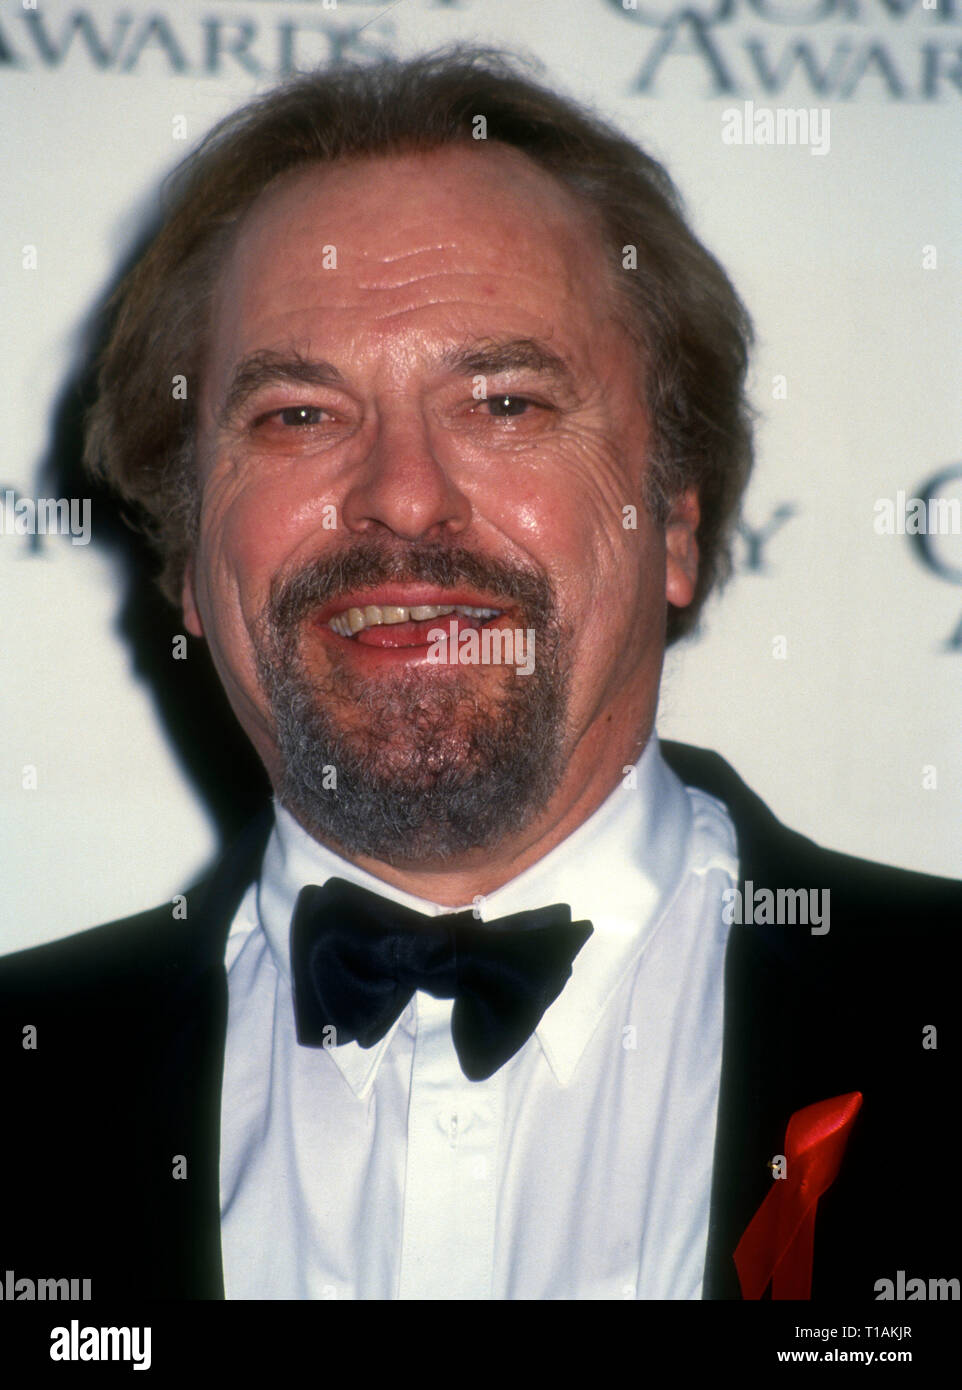 LOS ANGELES, CA - MARCH 6: Actor Rip Torn attends the Eighth Annual American Comedy Awards on March 6, 1994 at the Shrine Auditorium in Los Angeles, California. Photo by Barry King/Alamy Stock Photo Stock Photo